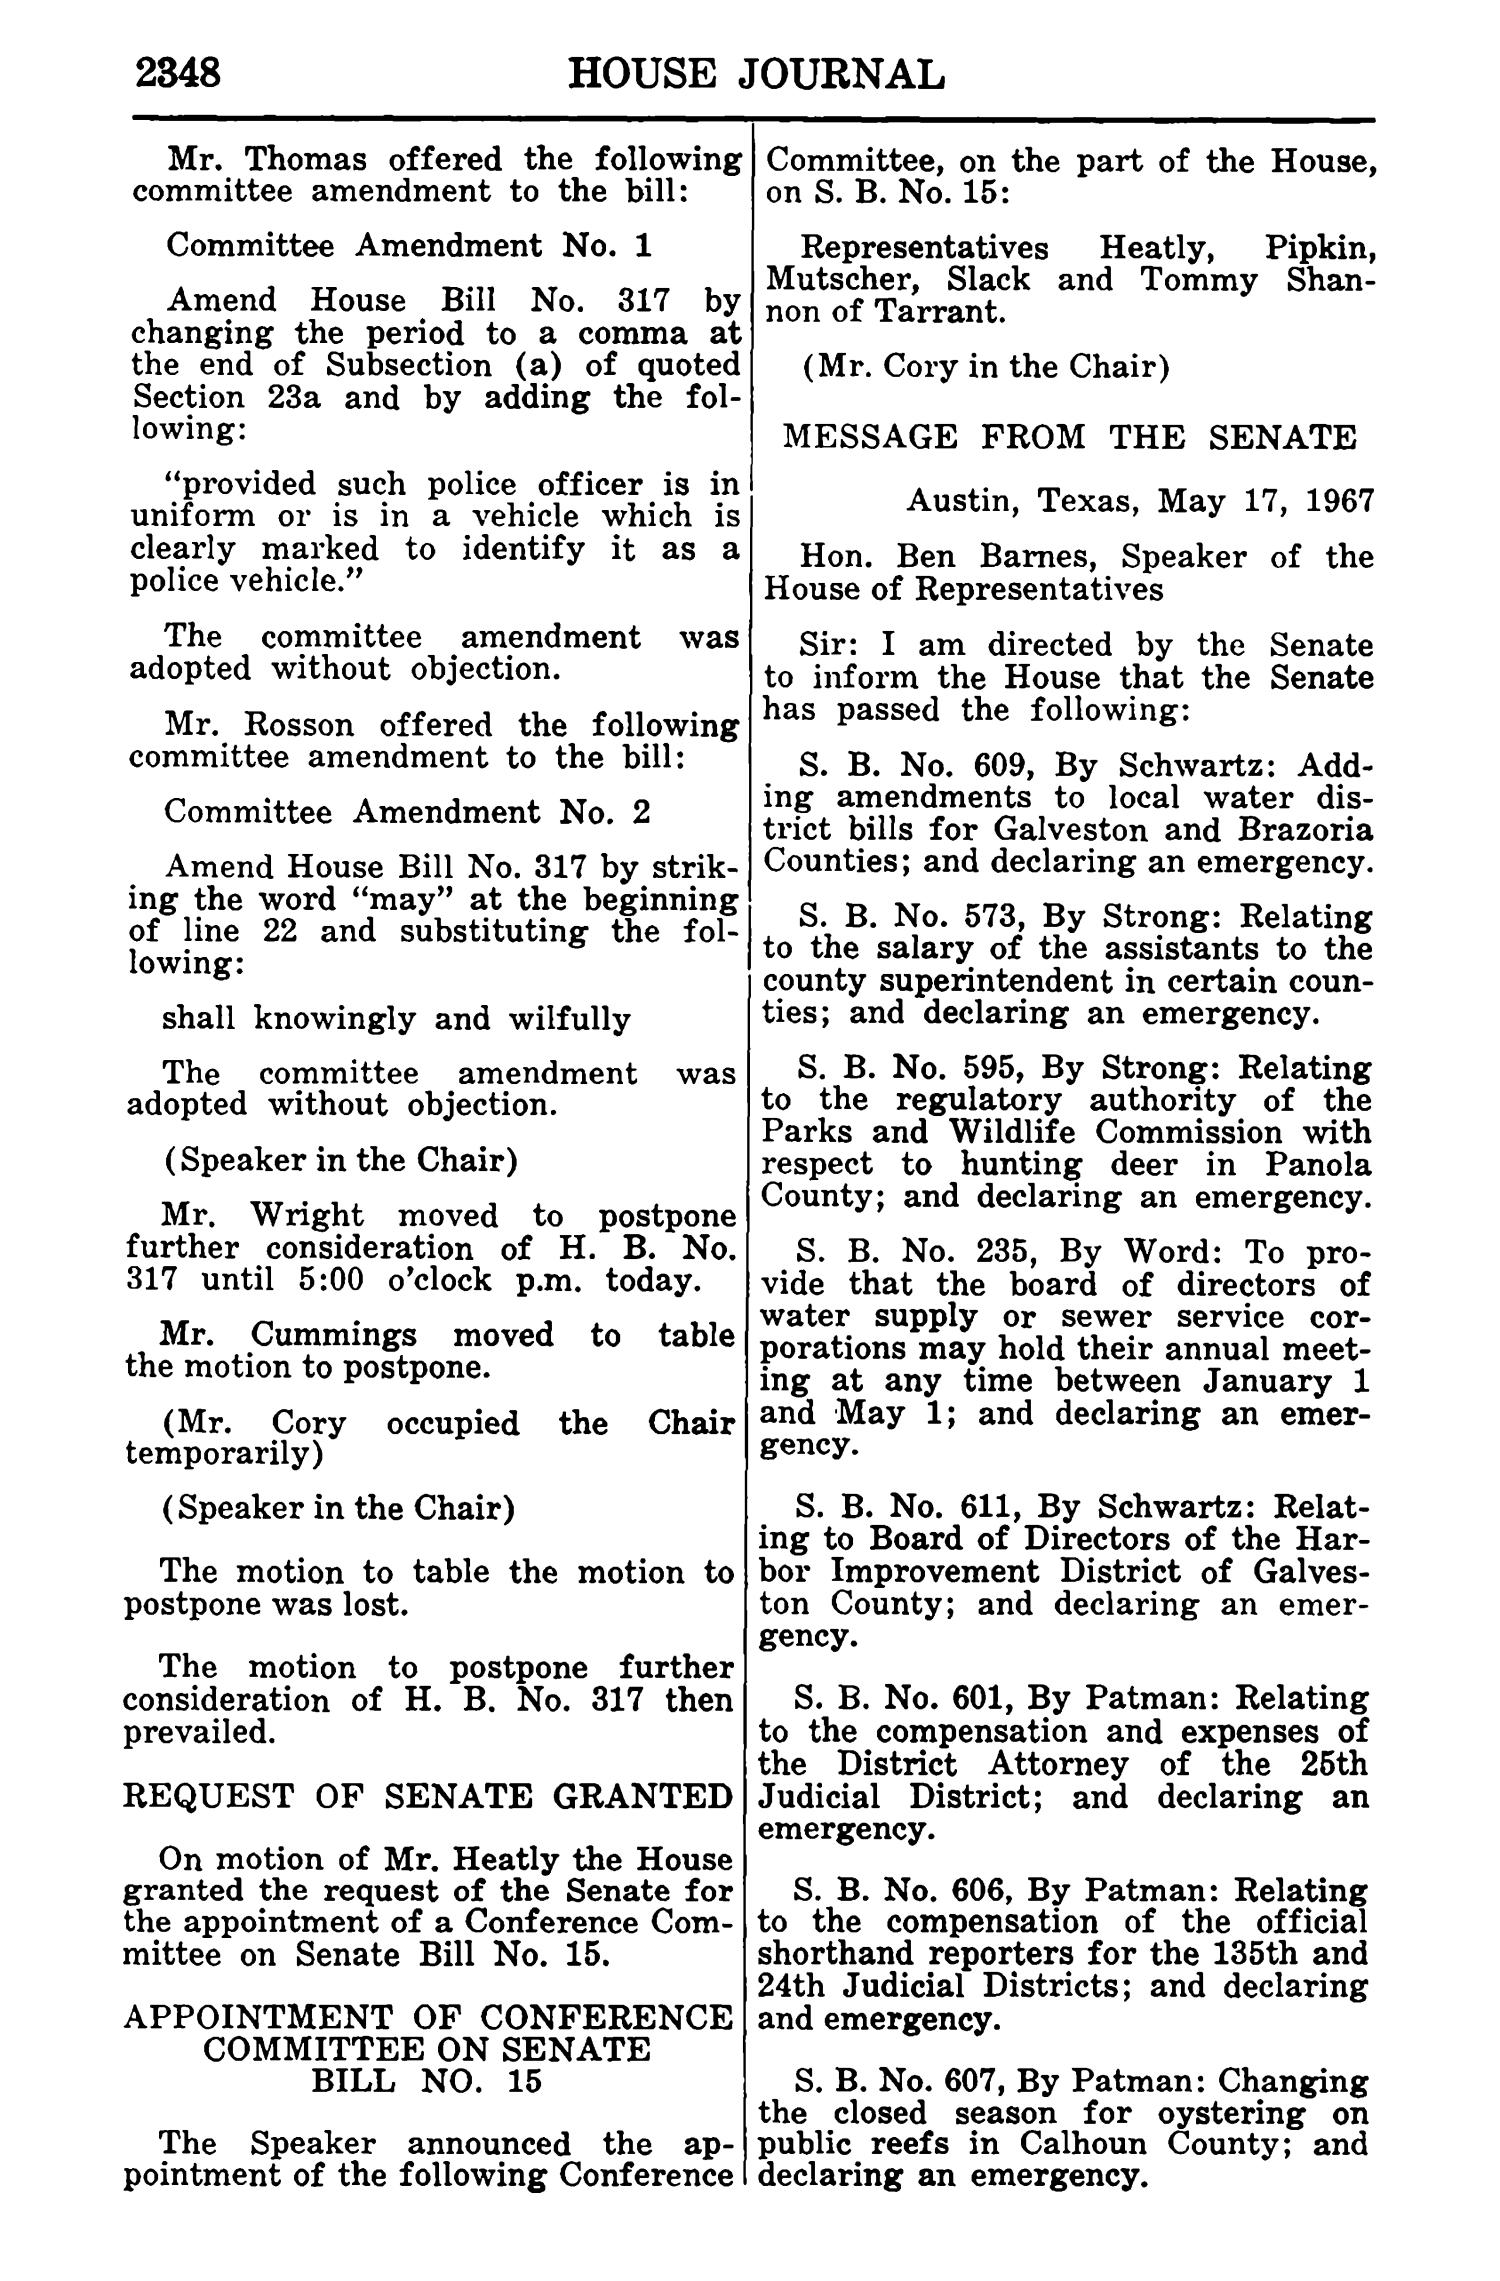 Journal of the House of Representatives of the Sixtieth Legislature of the State of Texas, Regular Session, Volume 2, and First Called Session
                                                
                                                    2348
                                                